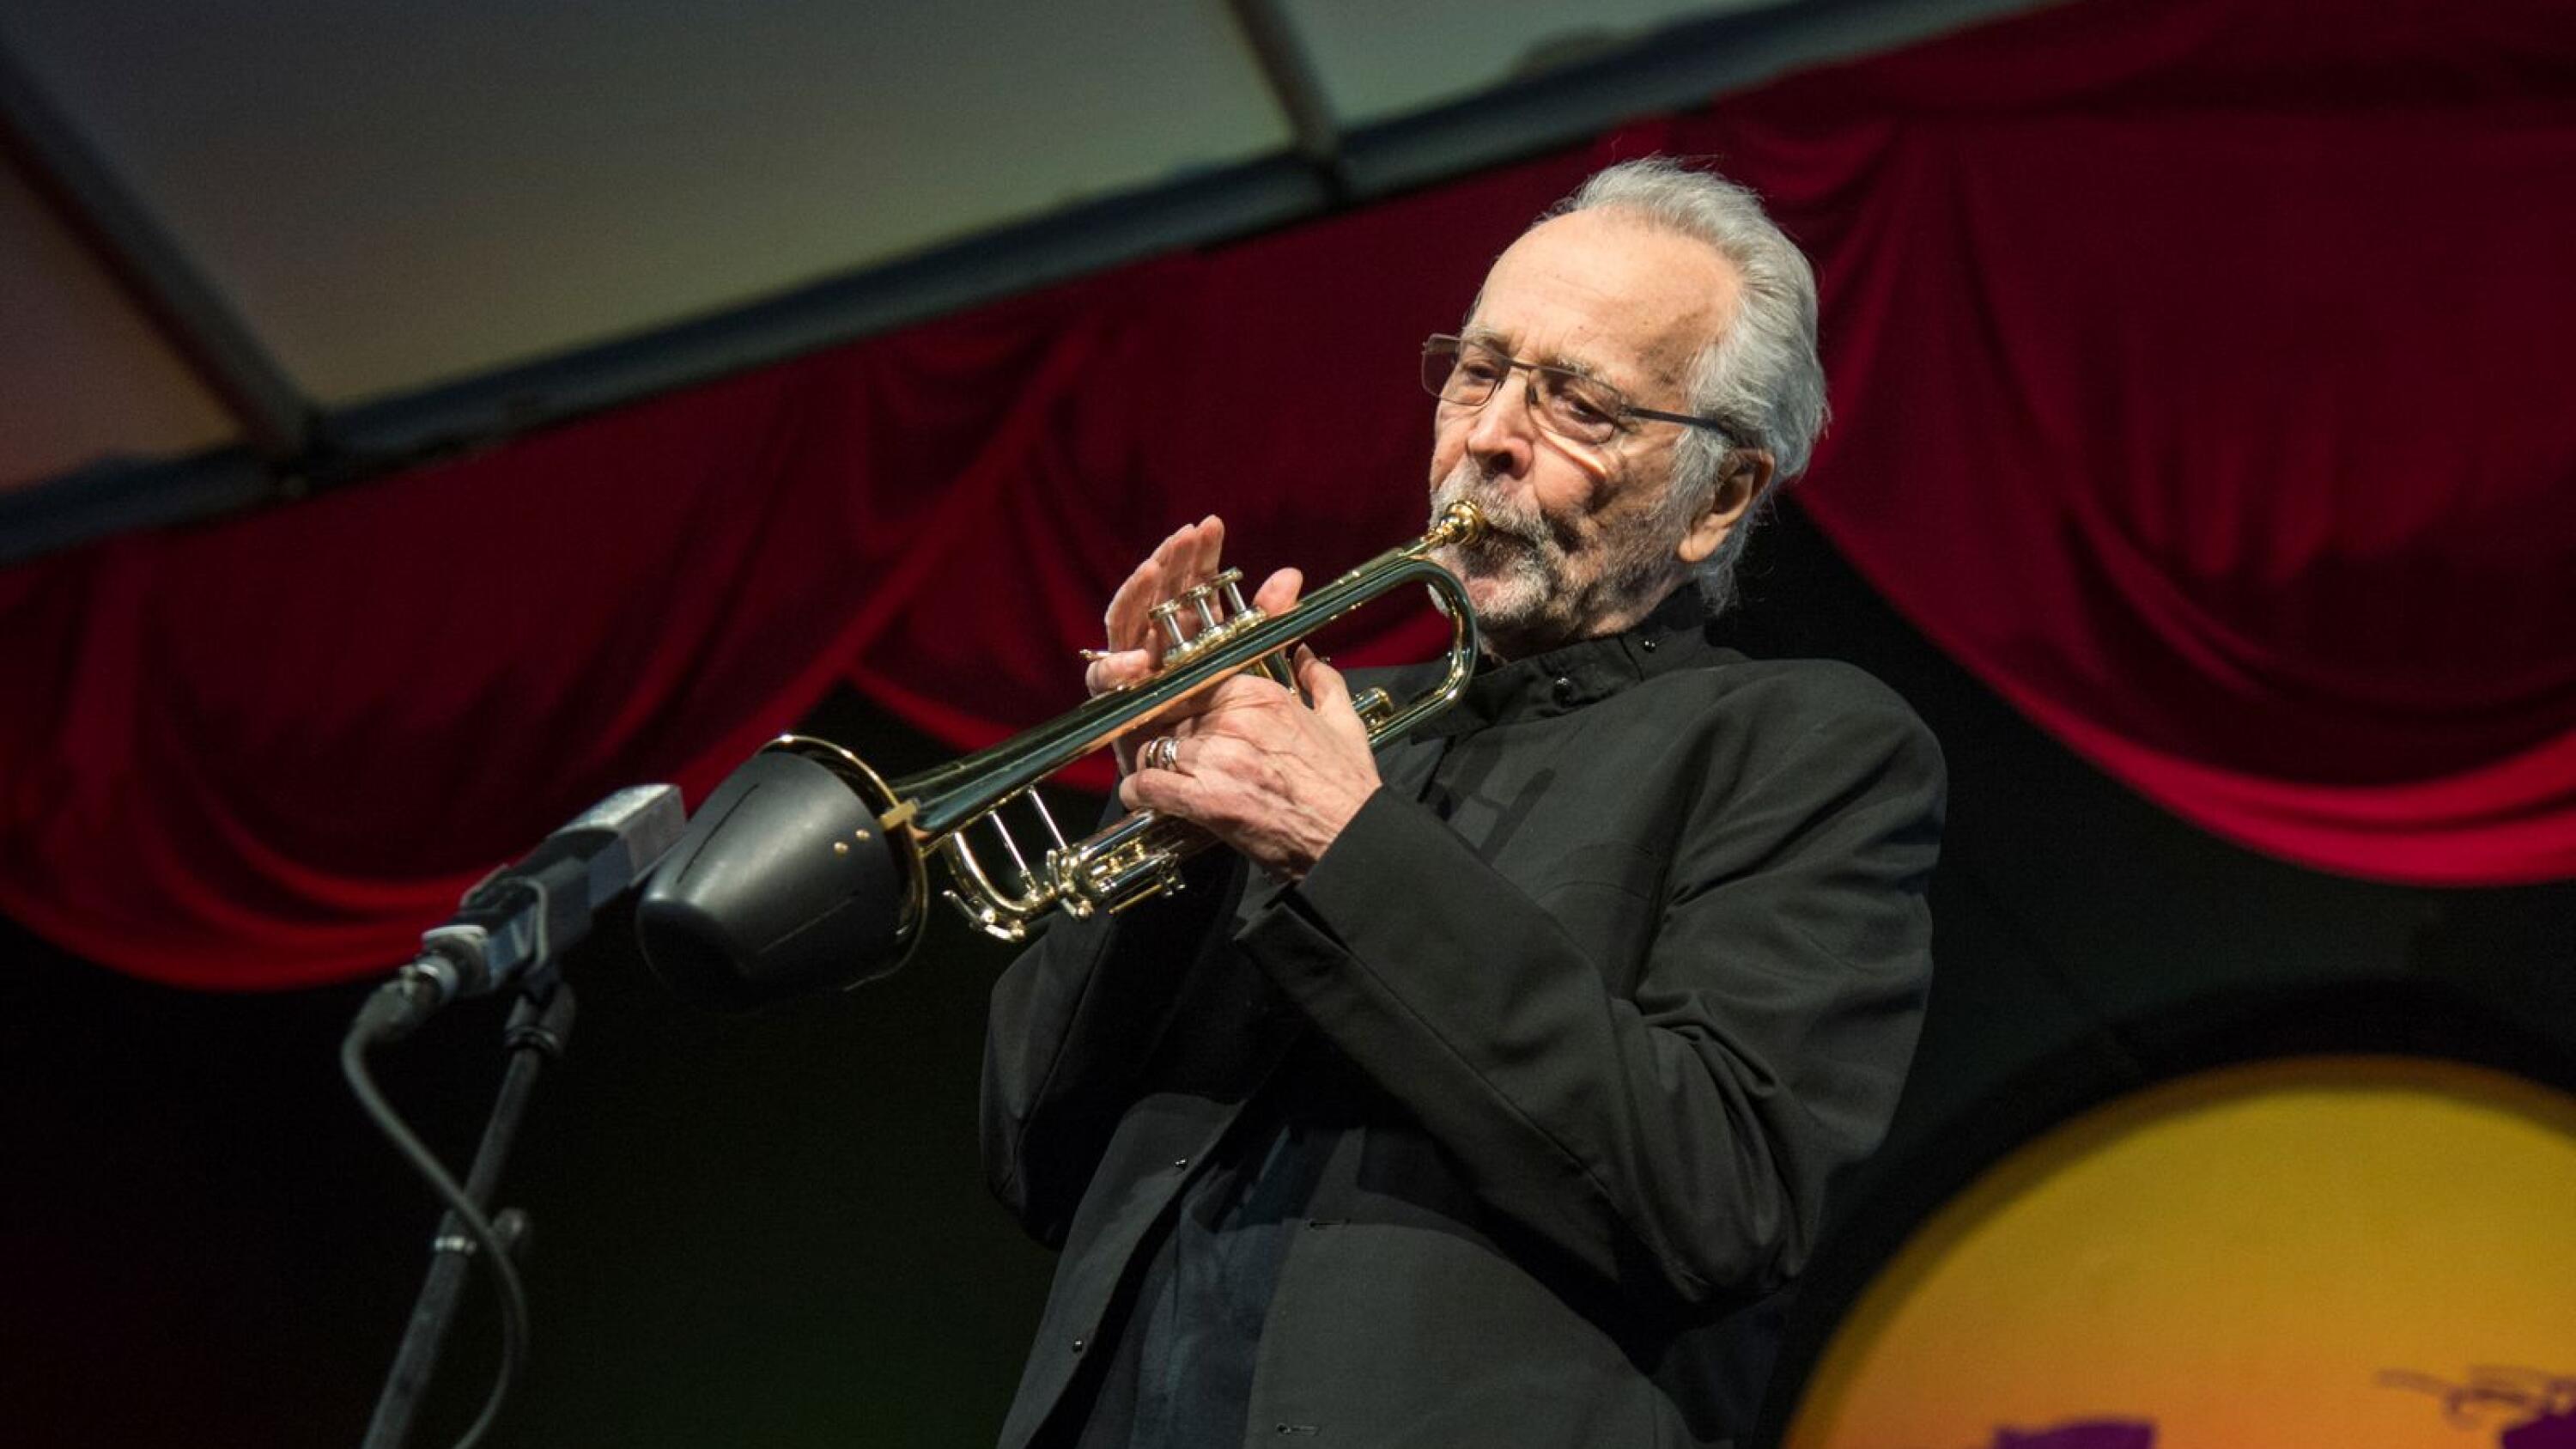 Thumbnail image for: Herb Alpert, Lani Hall play Tuesday in New London